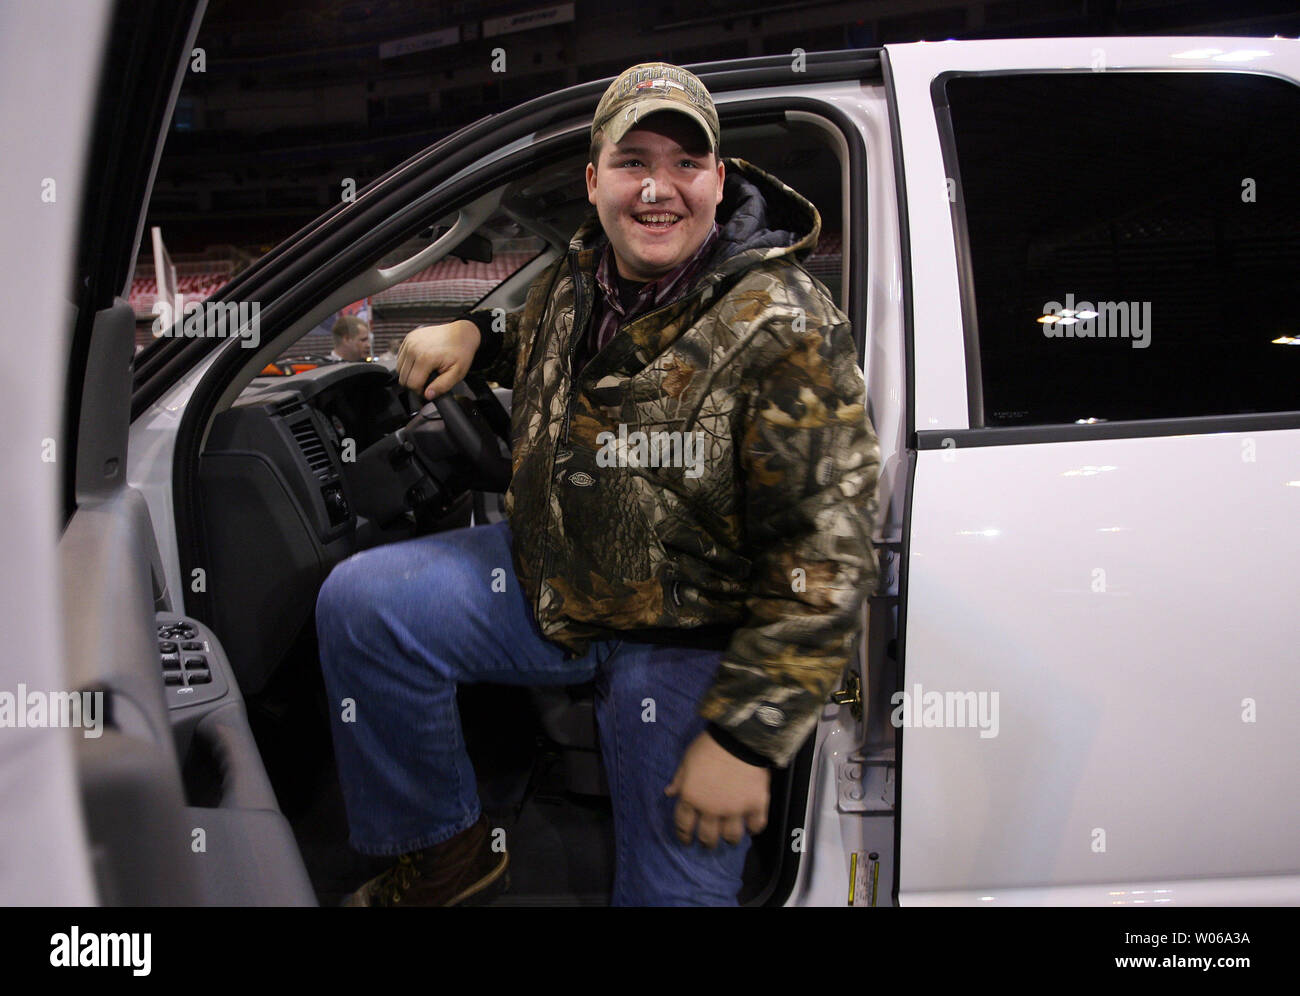 Mitchell Hults, the 15-year-old who identified the get-a-way vehicle used by kidnapper Michael Devlin to kidnap Ben Ownby on January 8, 2007, gets a closeup look at the new truck given to him as a reward by Chrysler at the St. Louis Auto Show in St. Louis on January 24, 2007. Although only 15, Hults will turn 16 in six months and plans to use it to haul an ATV. (UPI Photo/Bill Greenblatt) Stock Photo